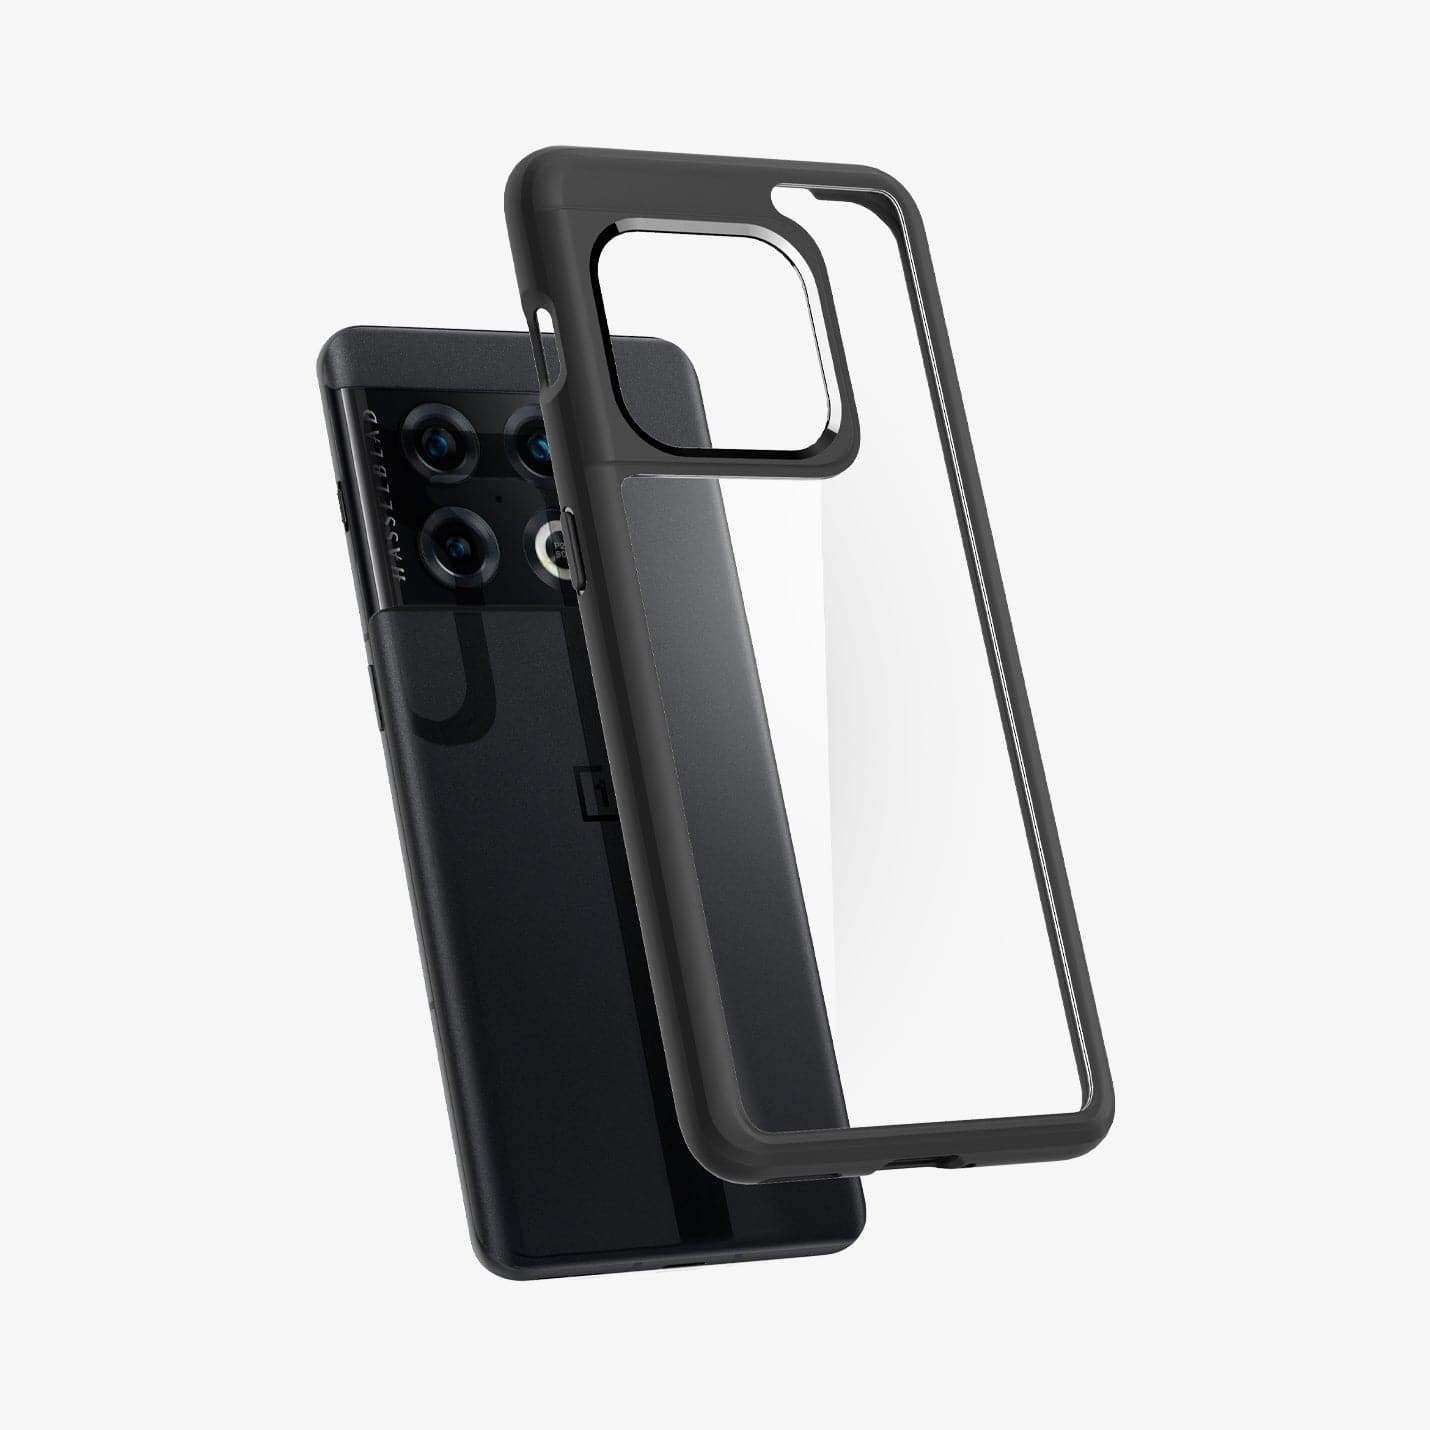 ACS04429 - OnePlus 10 Pro Ultra Hybrid Case in Black showing the transparent back case with black frame hovering in front of device